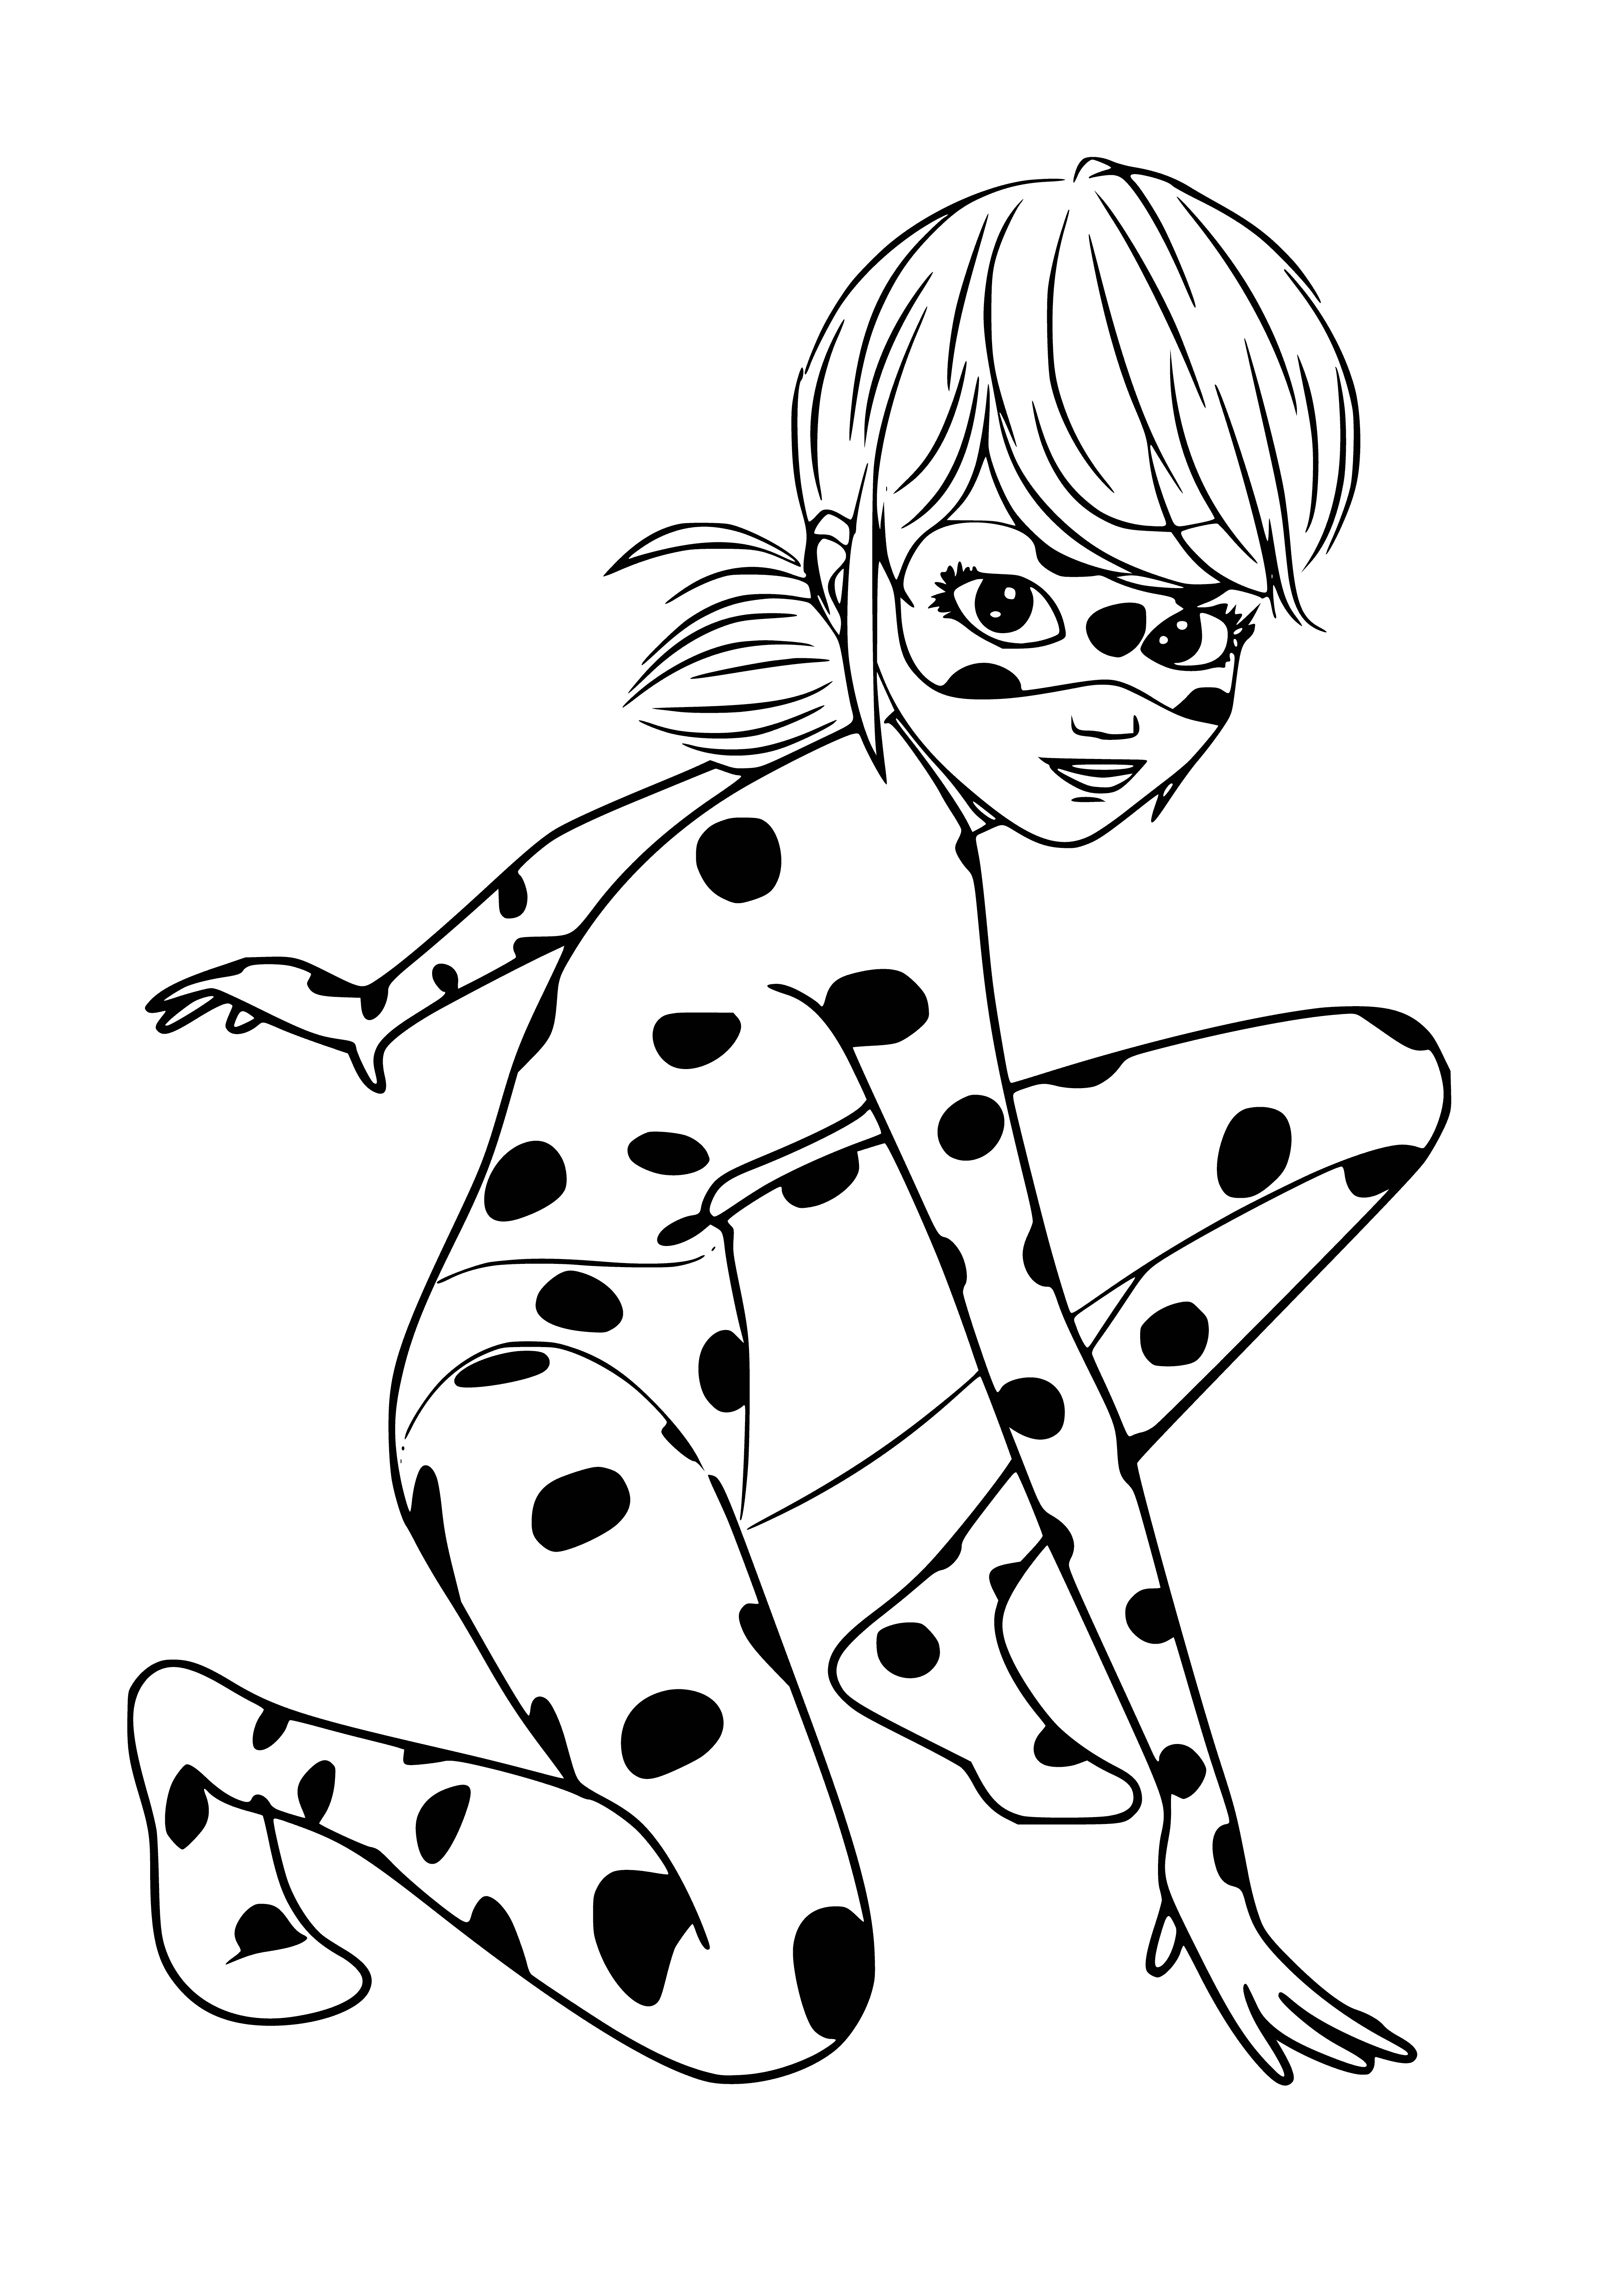 coloring page: Teenage girl in red & black costume w/ black mask, spotted cape, polka dot belt, black gloves w/ red cuffs & black boots w/ red laces. Always smiling.